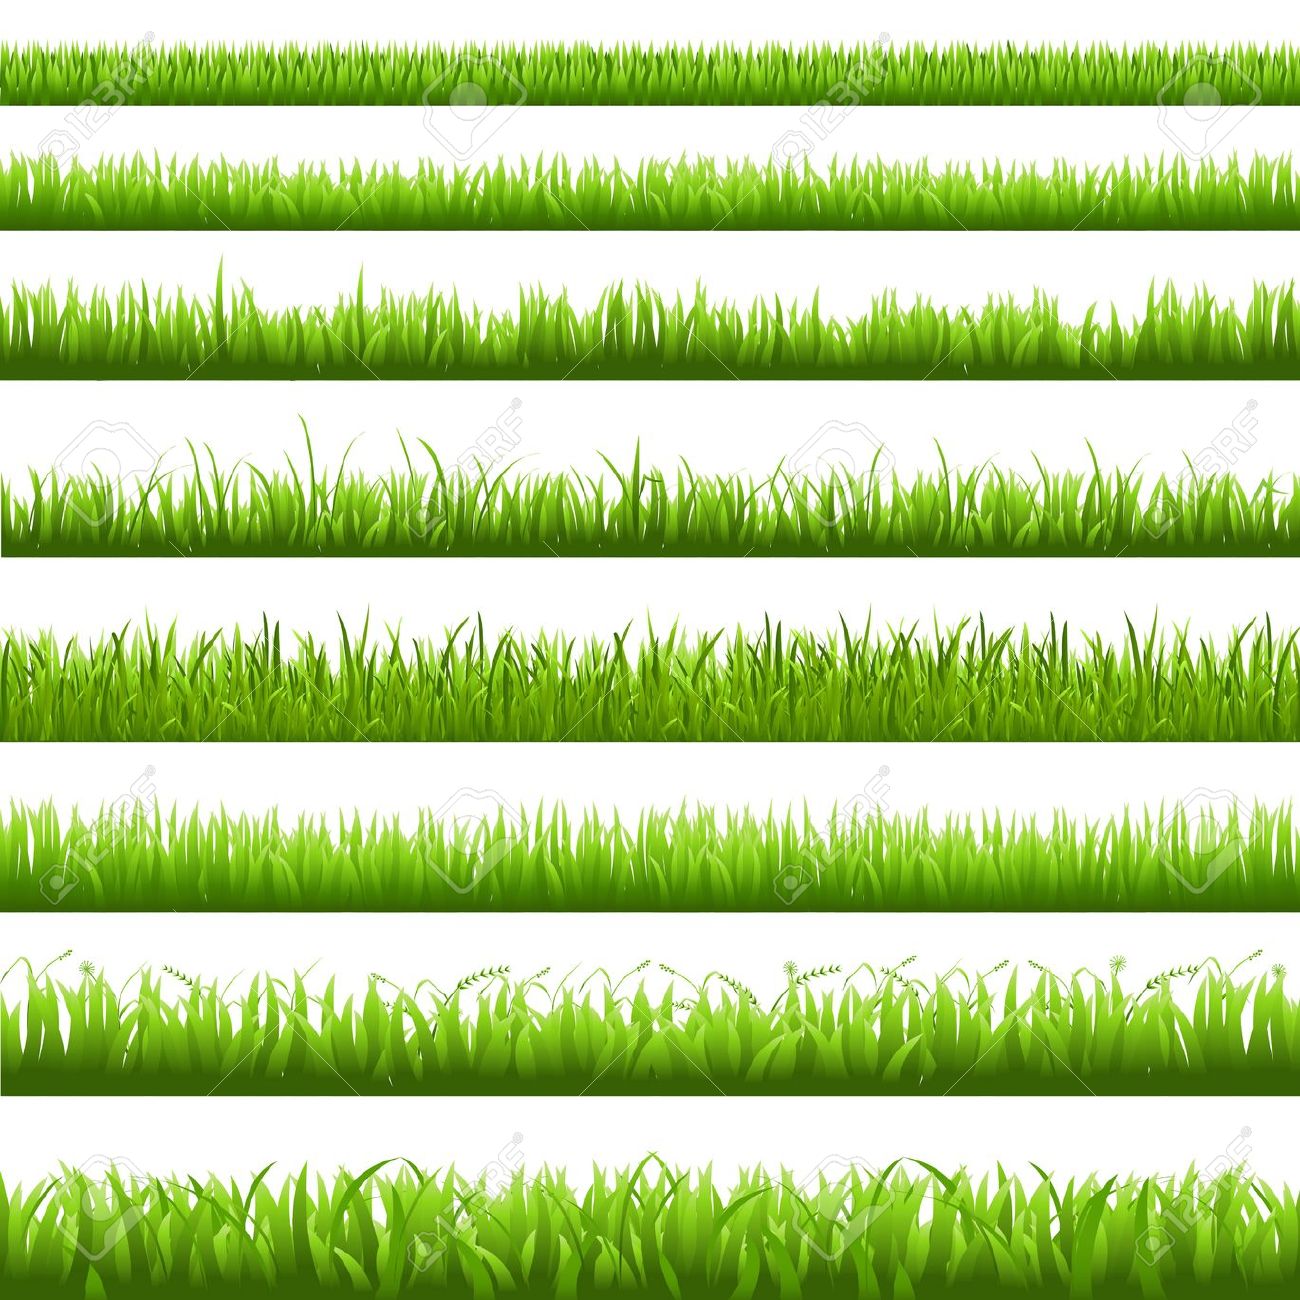 9,419 Turf Stock Vector Illustration And Royalty Free Turf Clipart.